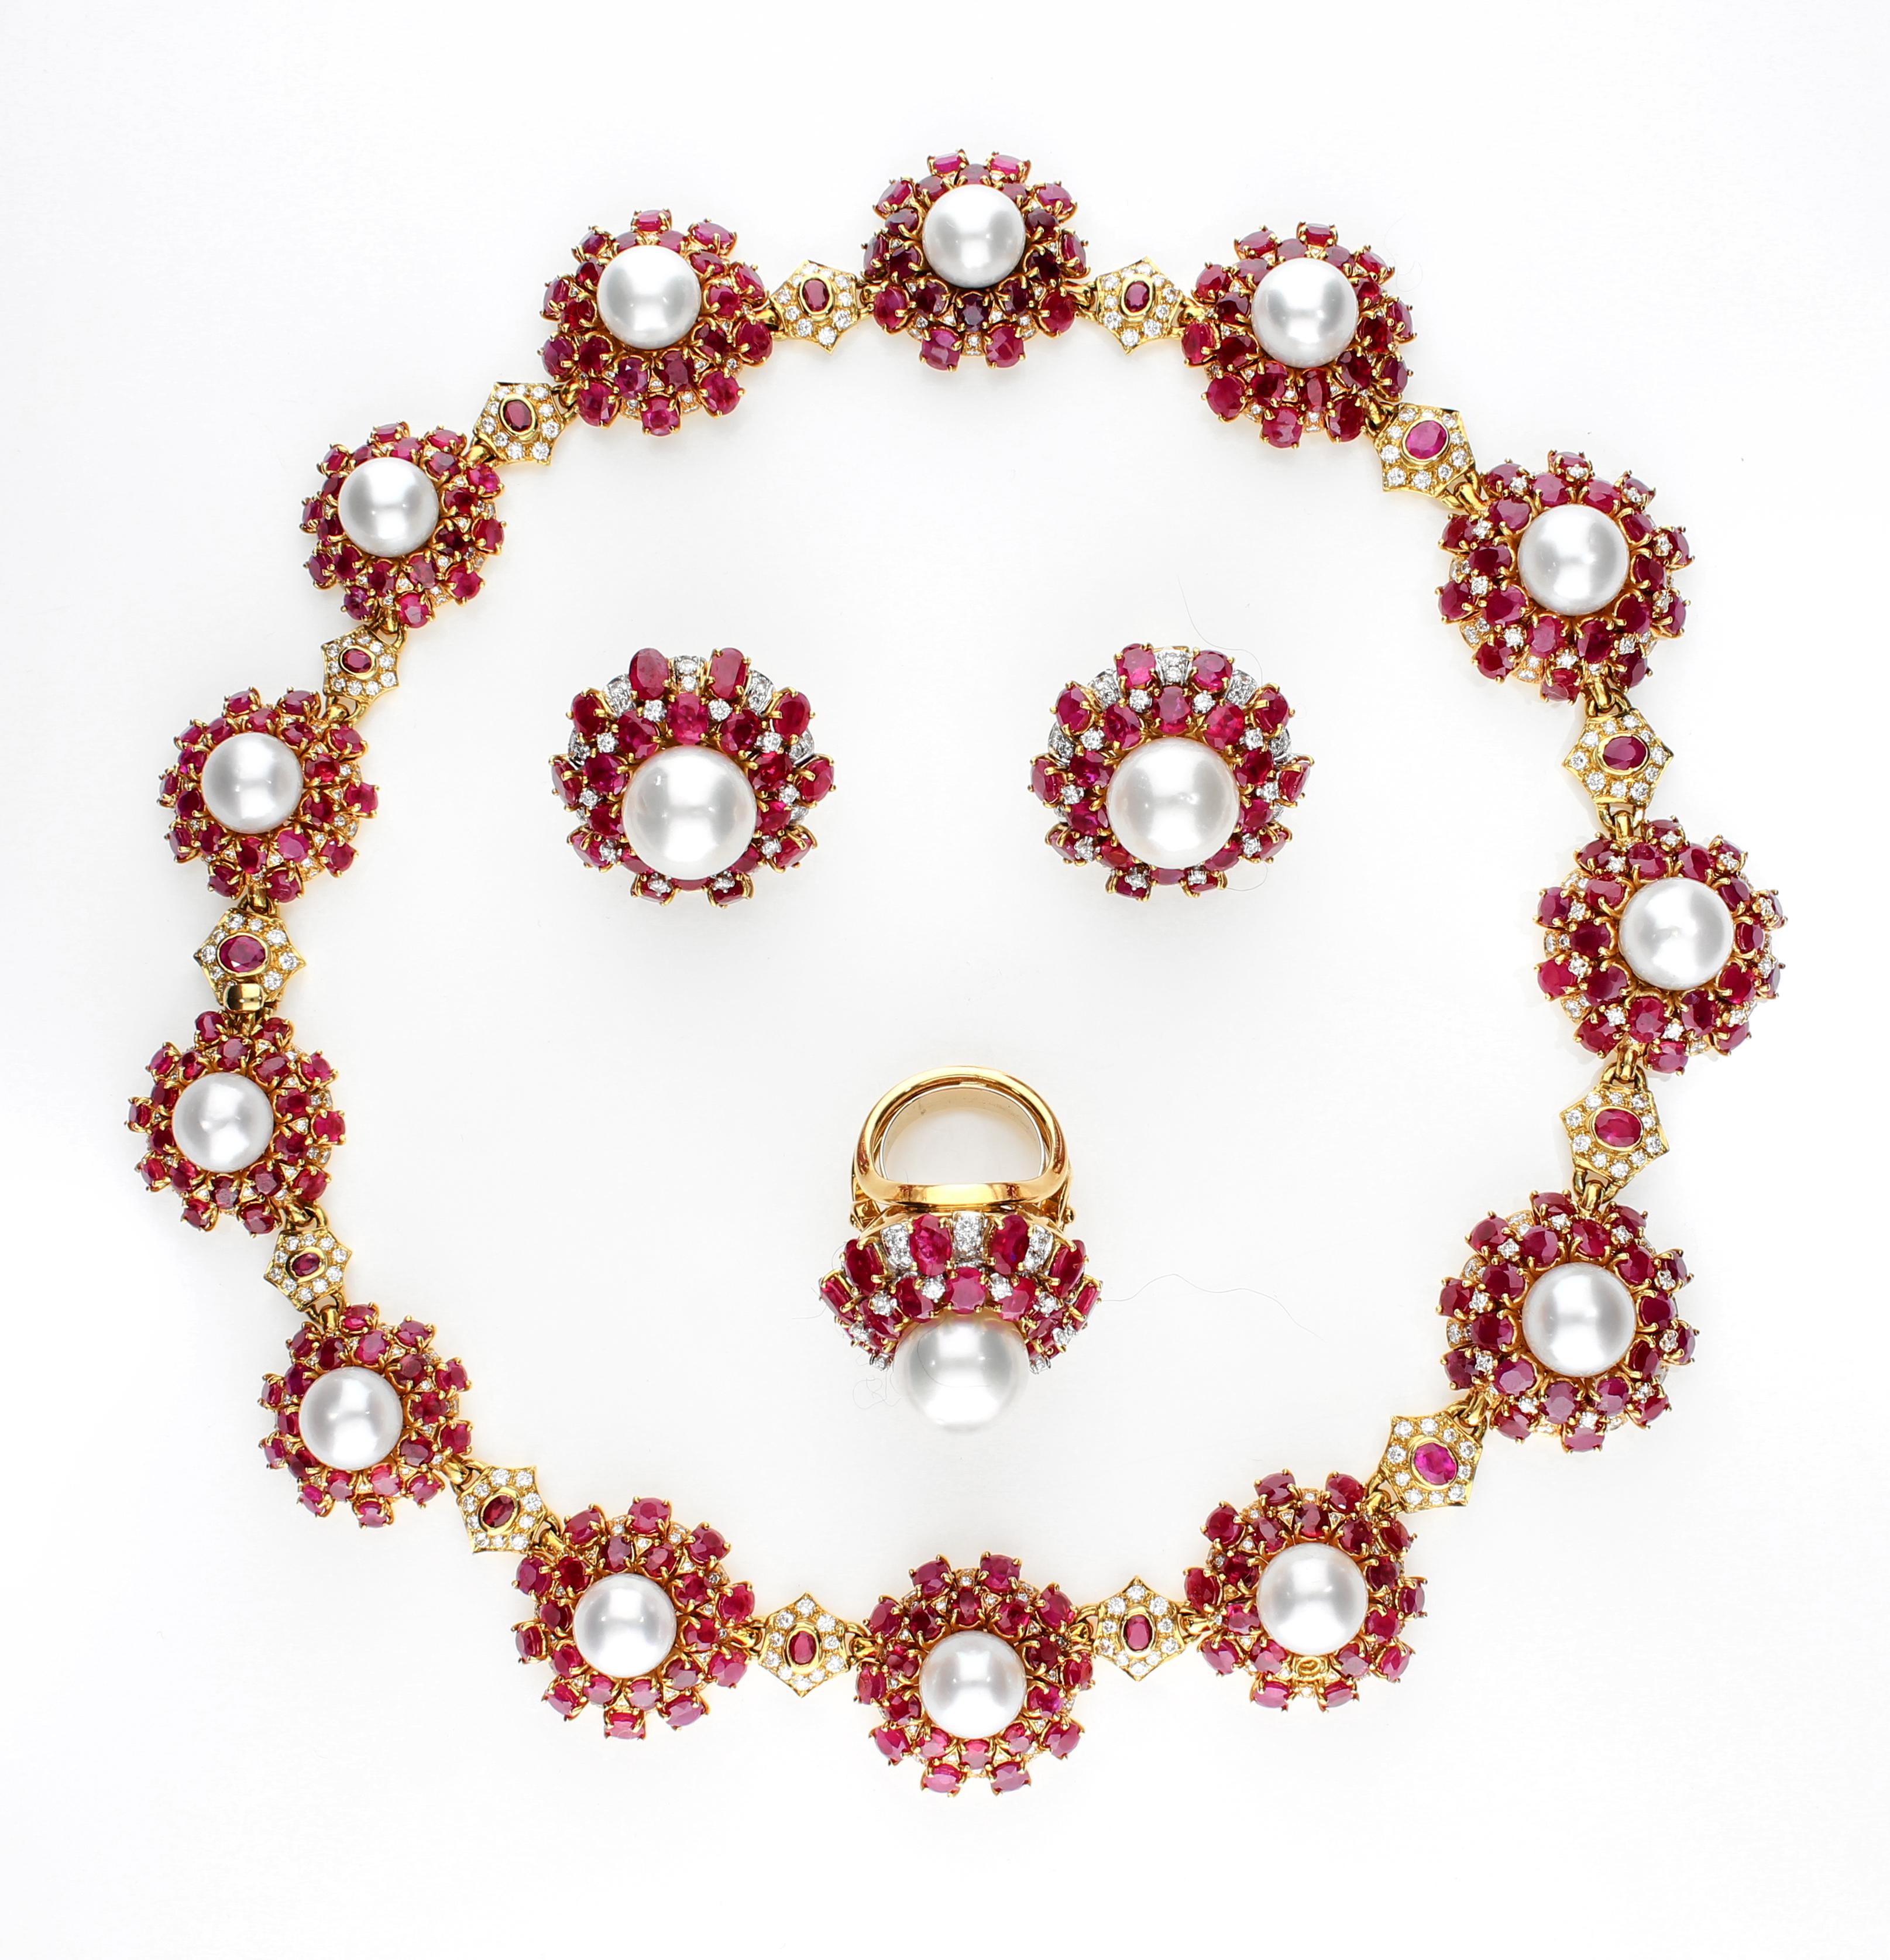 Necklace with Rubies, Pearls and Diamonds in 18 Karat Yellow Gold 13